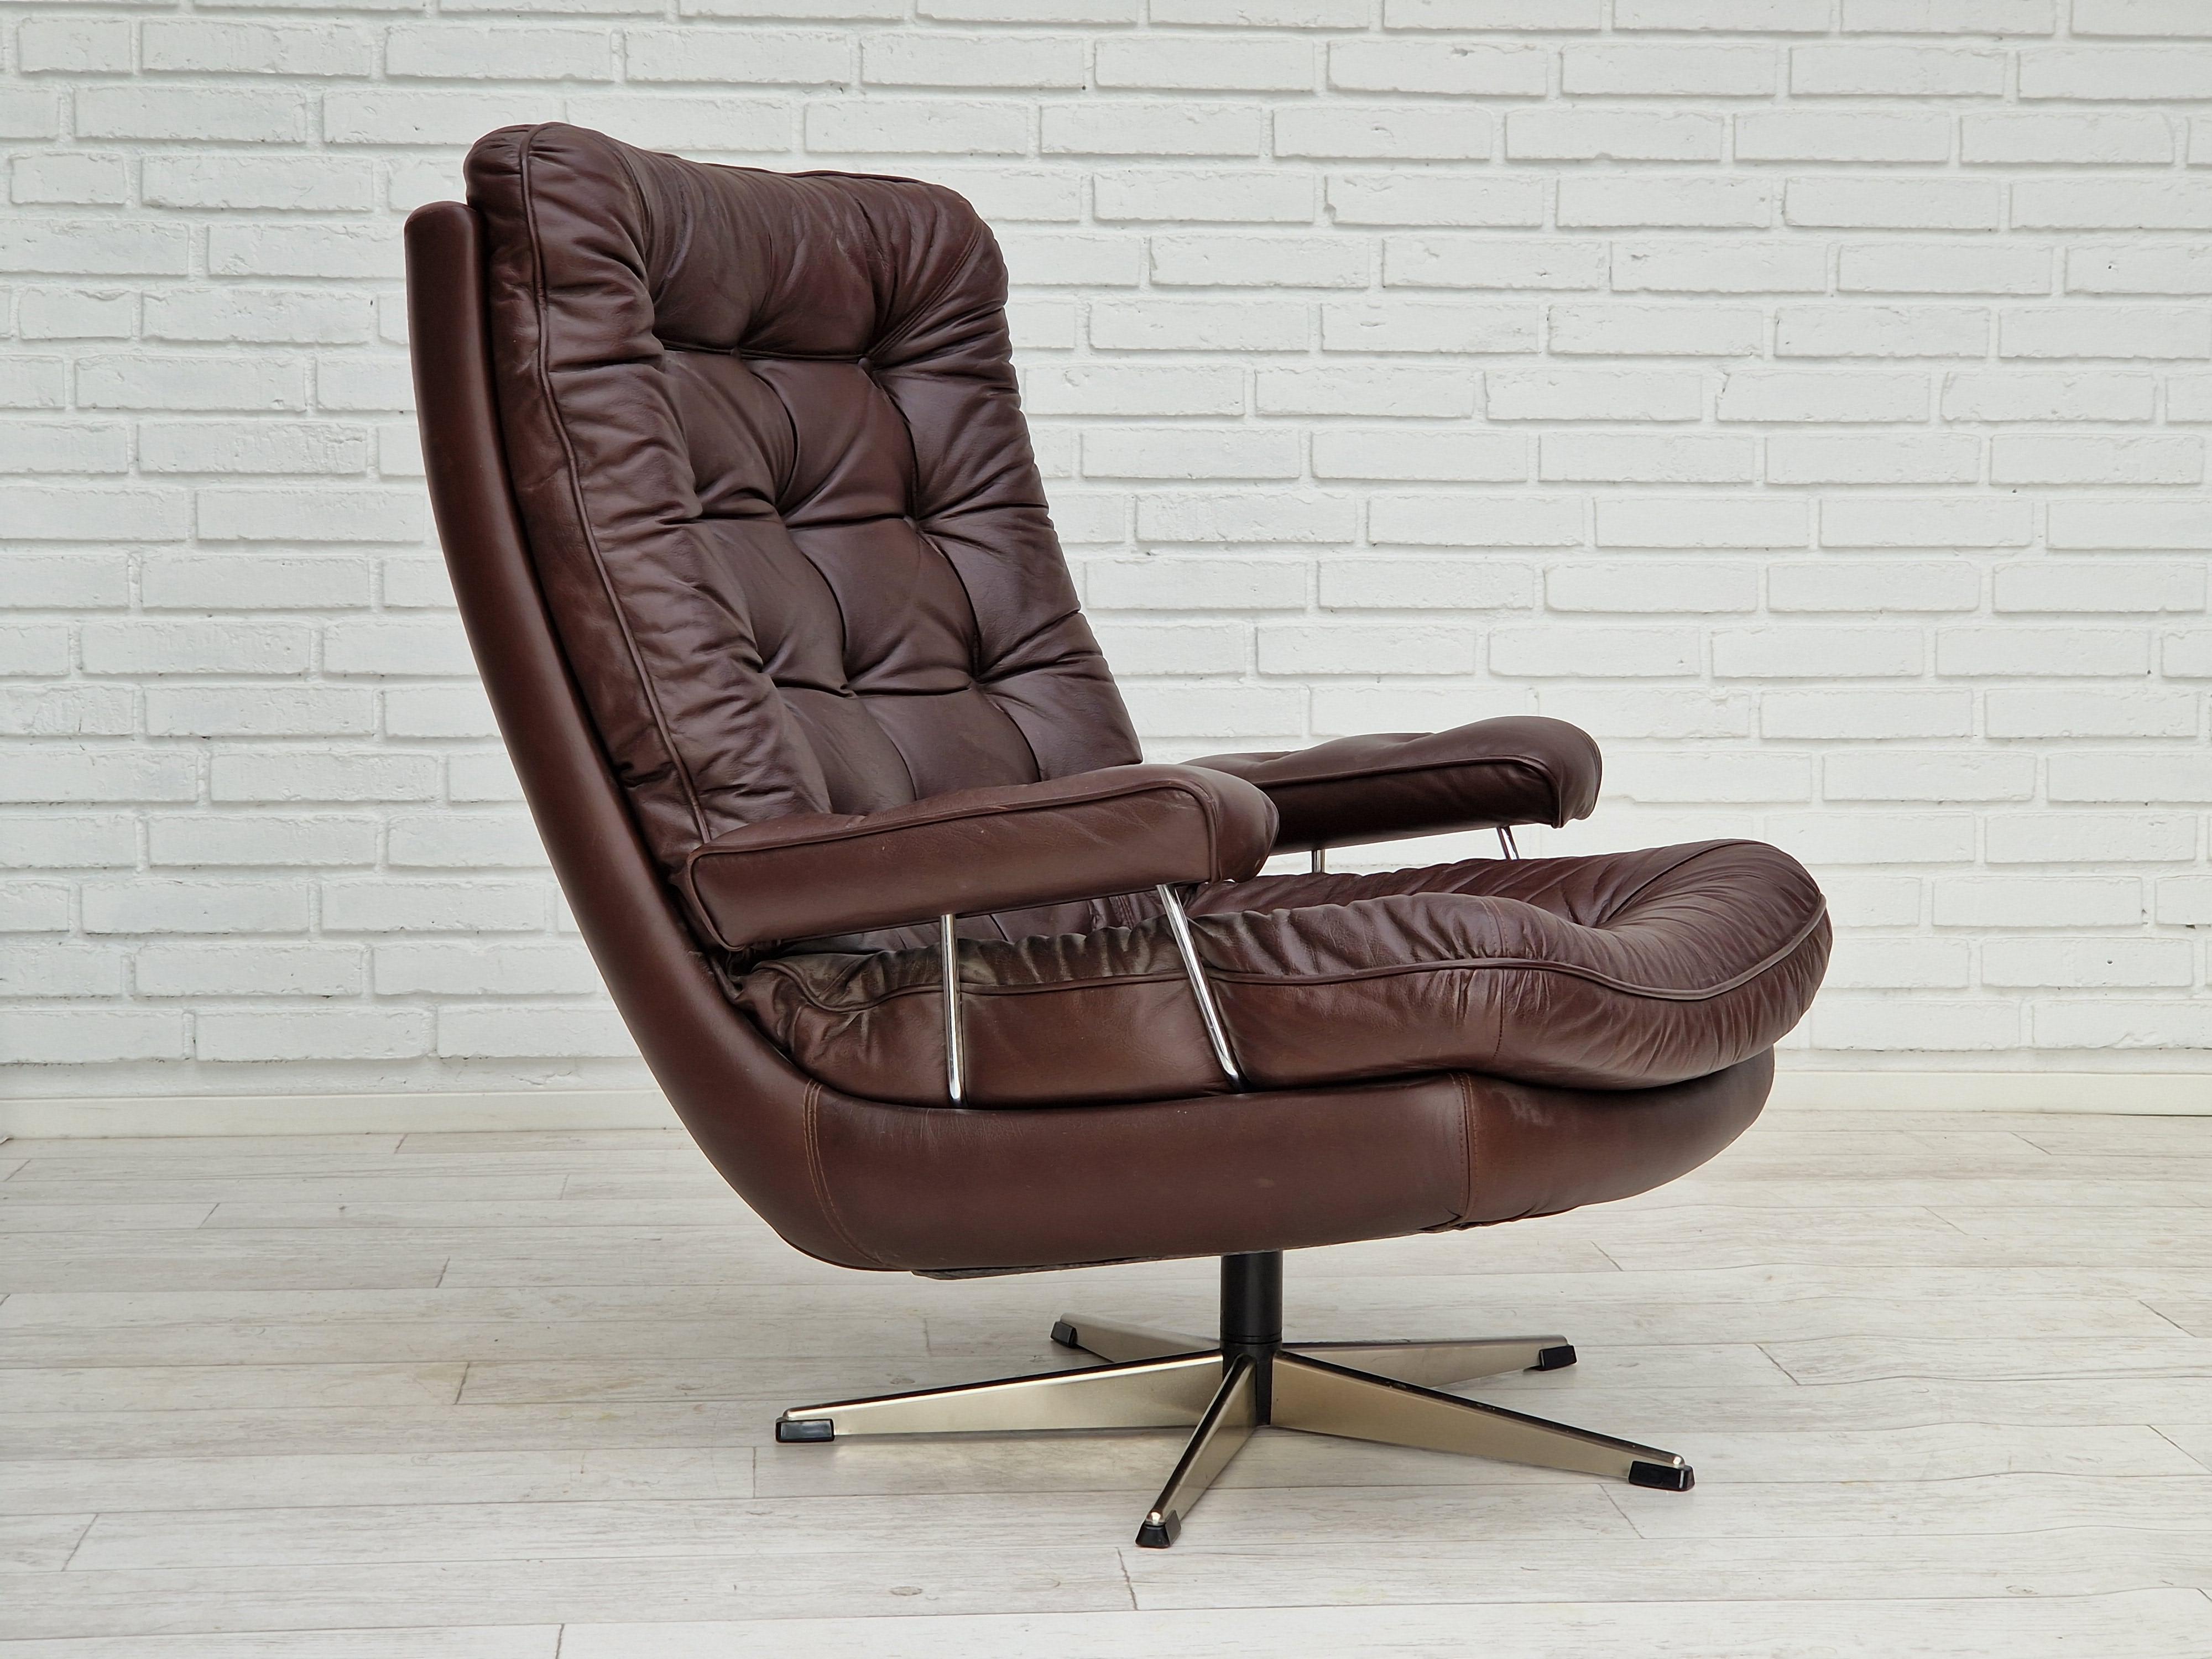 70s, Danish swivel armchair. Original upholstery in brown leather. Five-star base made of chrome steel. Made in about 1970 by Danish furniture manufacturer. Original very good condition. No smells, no stains.